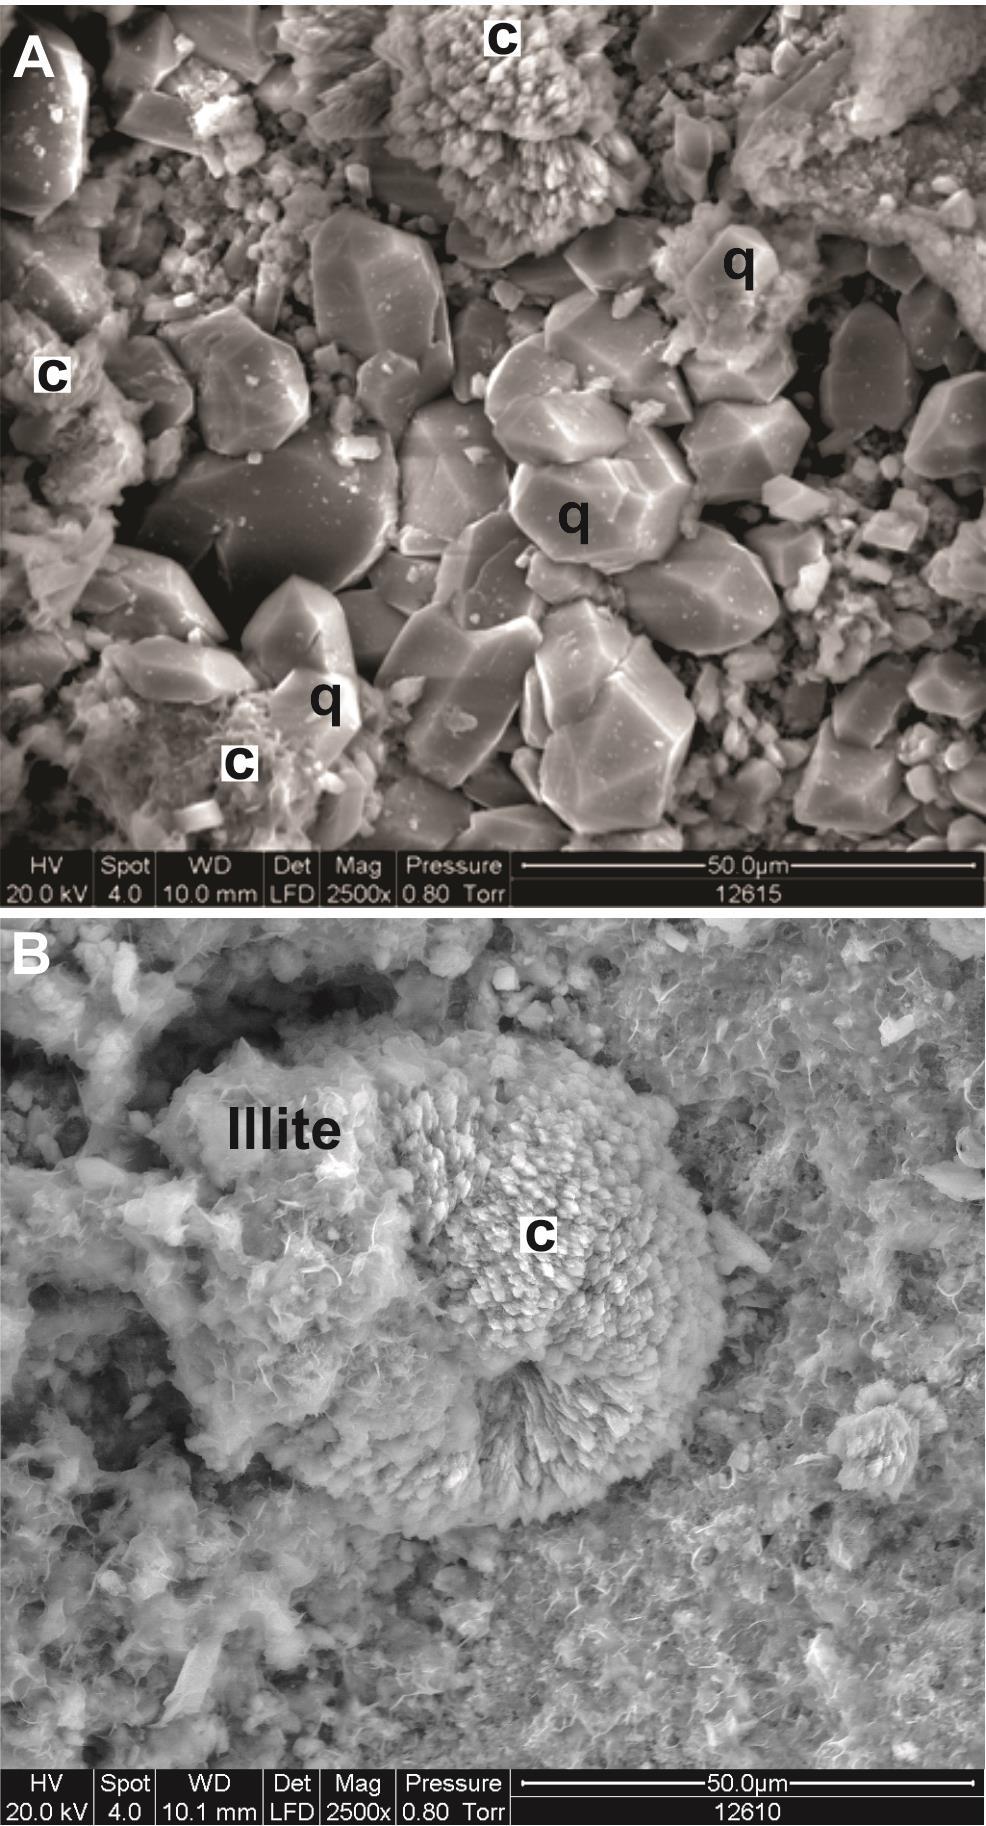 Simmons and Christenson, 1994). Upon cooling after boiling, quartz crystals form. Figure 1B illustrates the relationship between bladed calcite and illite where illite formed after bladed calcite.